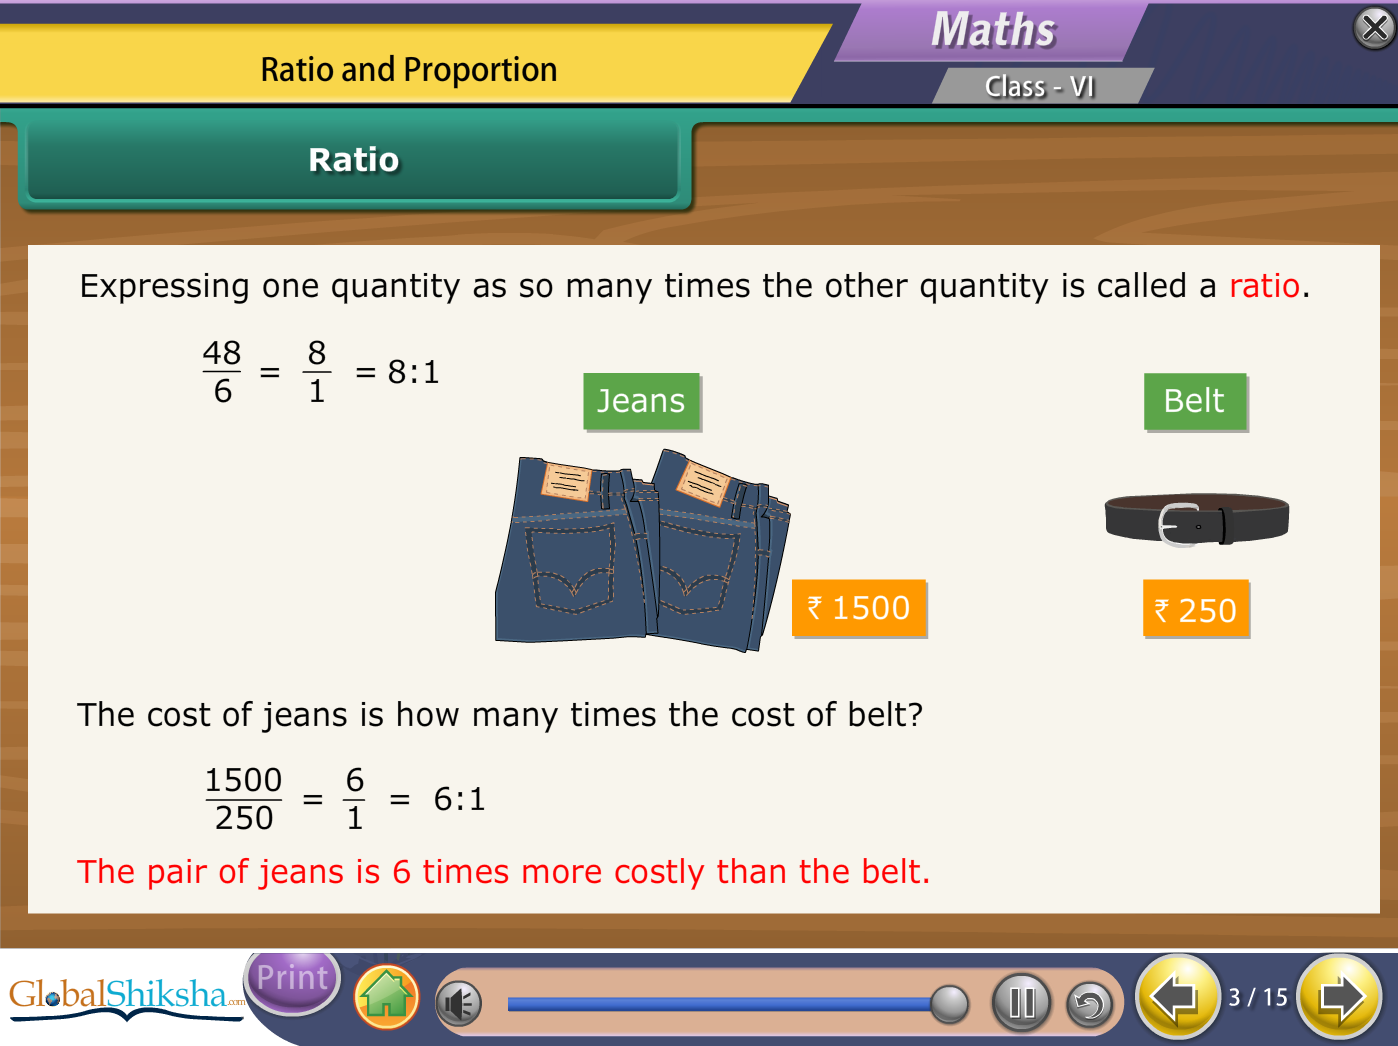 Maharashtra State Board Class 6 Maths & Science Animated Pendrive in English